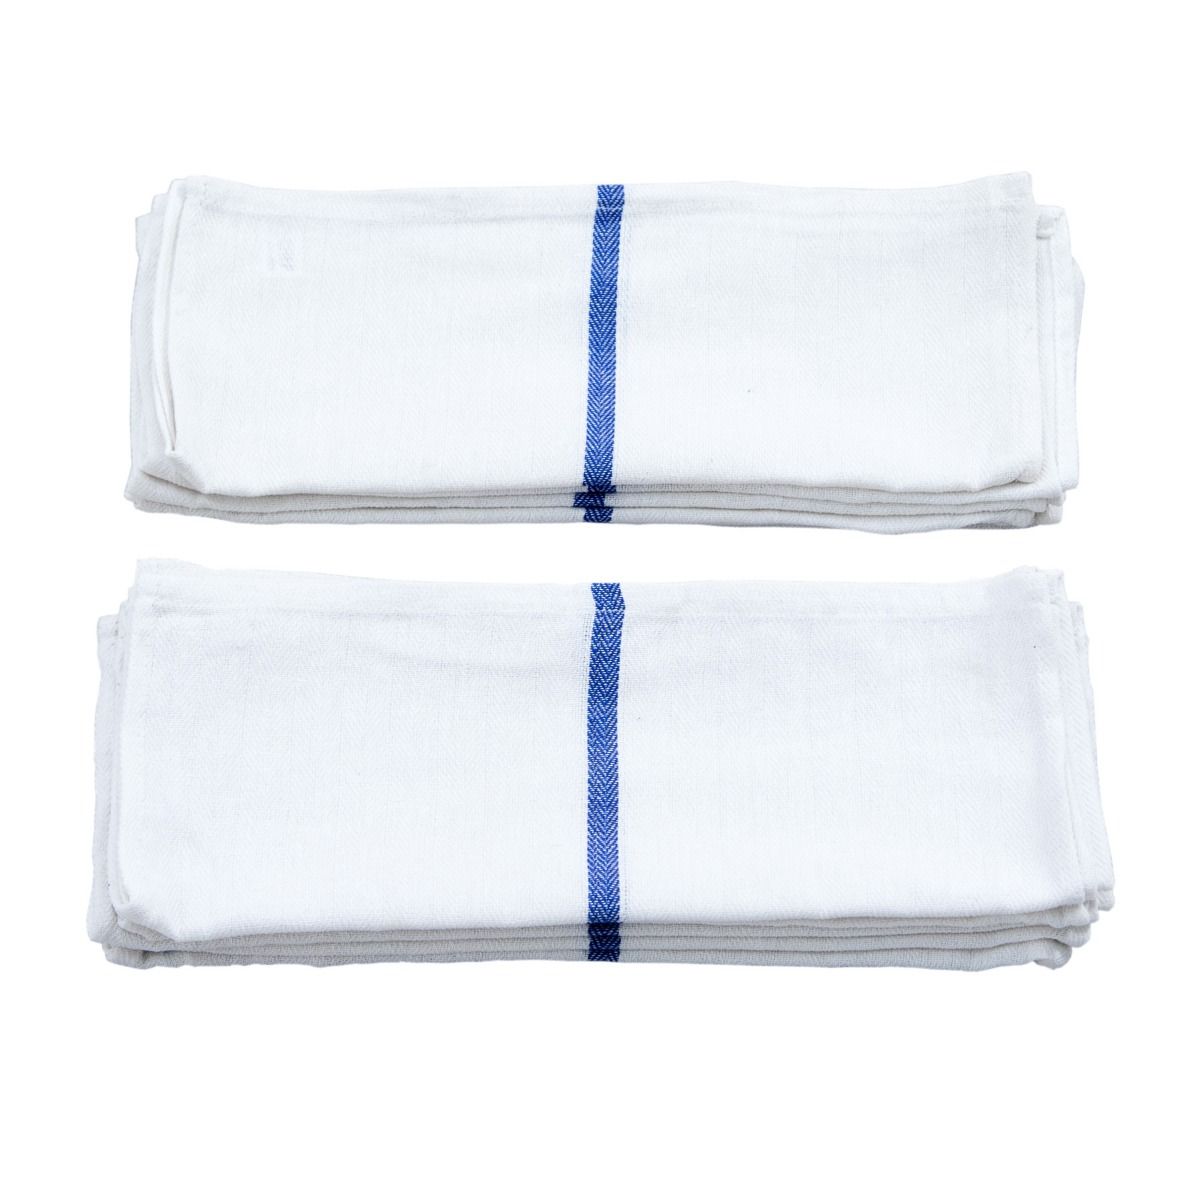 Standard 16" x 19" White Commercial Bar Towels 24onz Weight on Special Discount 